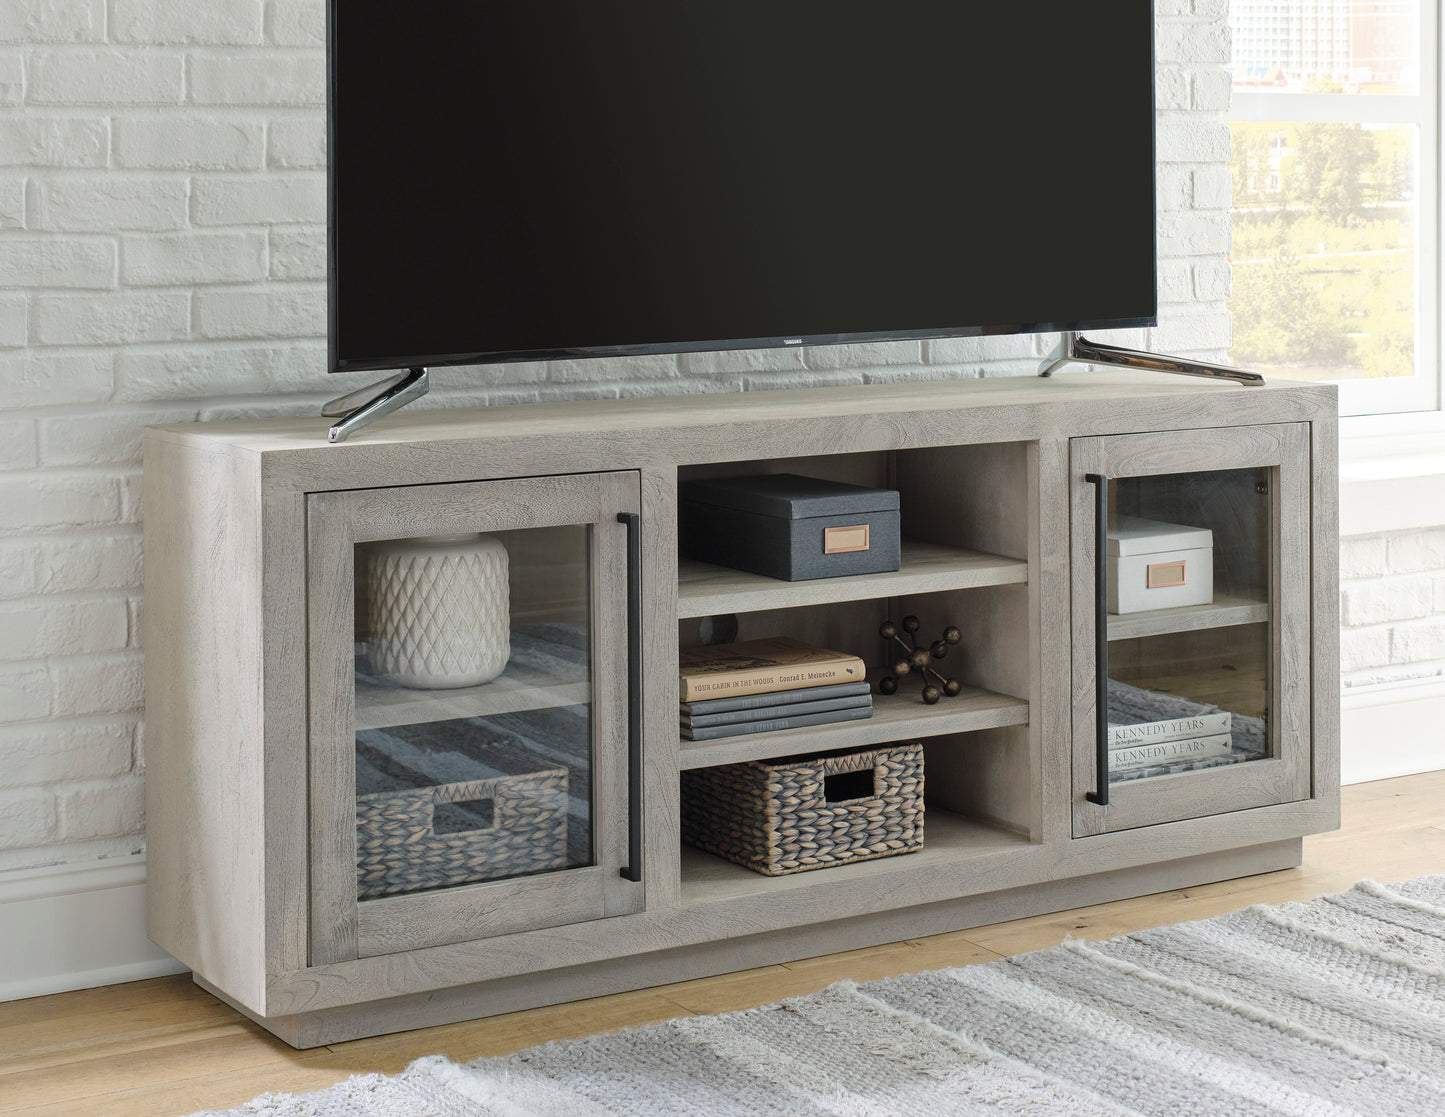 Lockthorne Accent Cabinet (Mix solid wood)